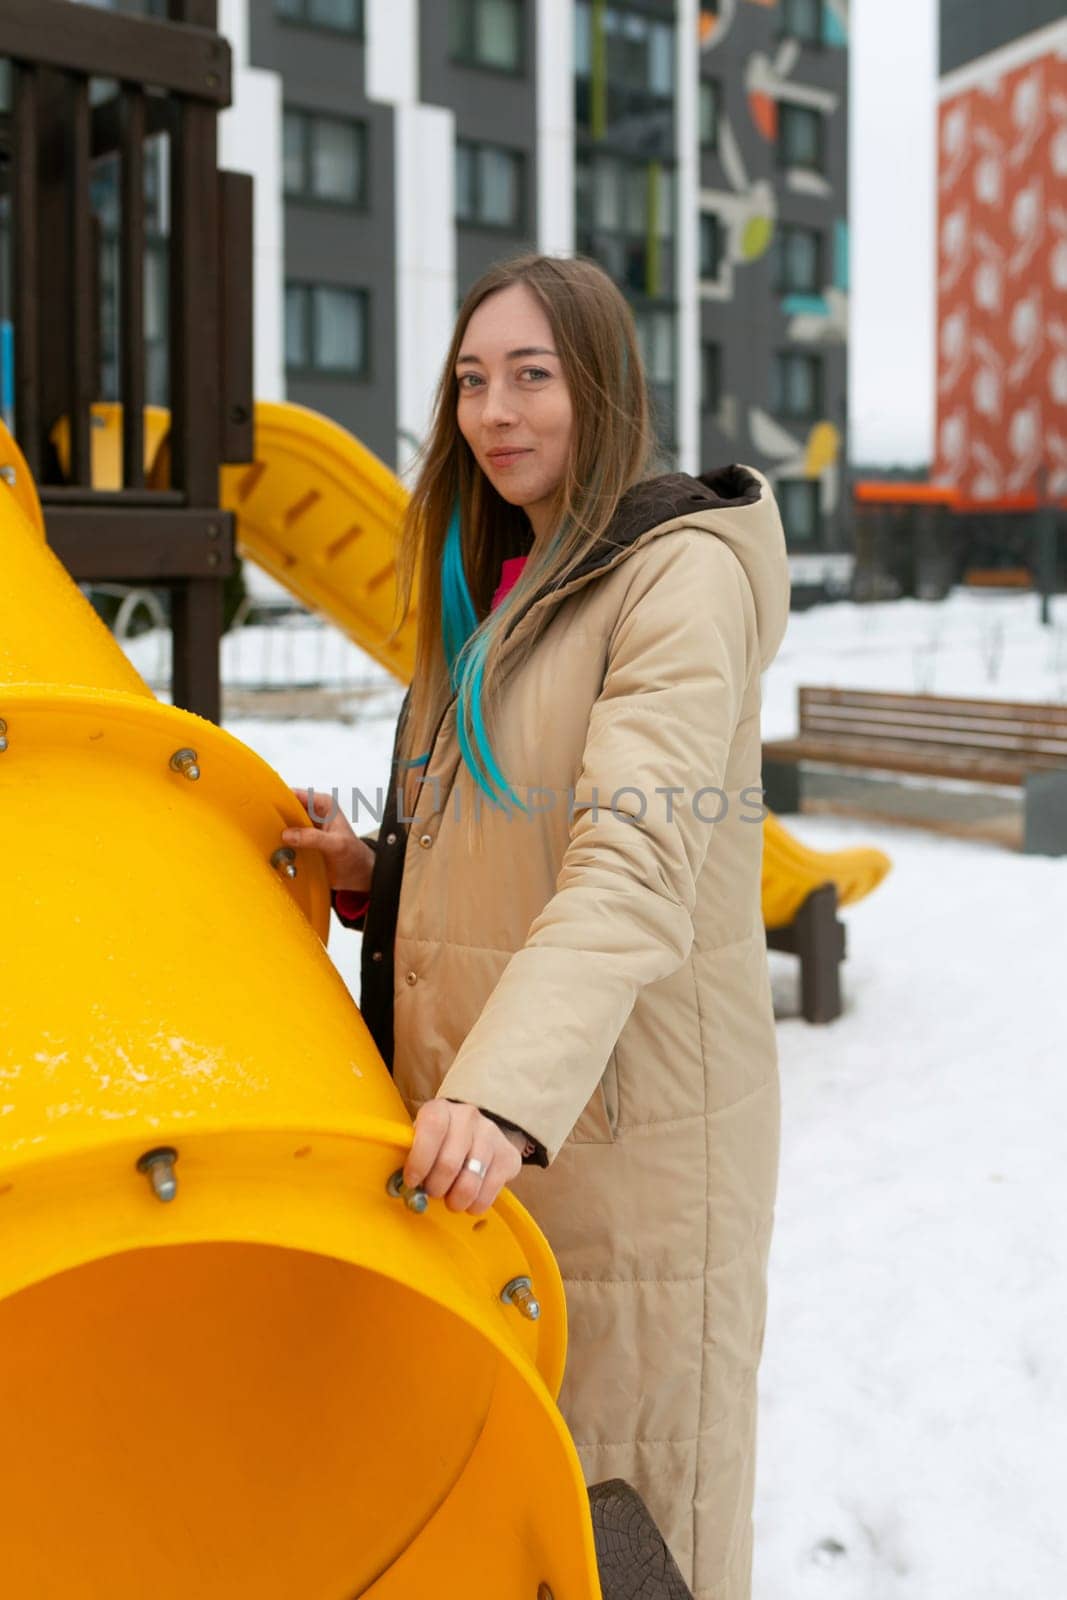 A woman is standing next to a bright yellow playground structure, looking towards the camera. The playground equipment features slides, stairs, and platforms. The scene is set in a sunny park with green grass and clear blue skies.